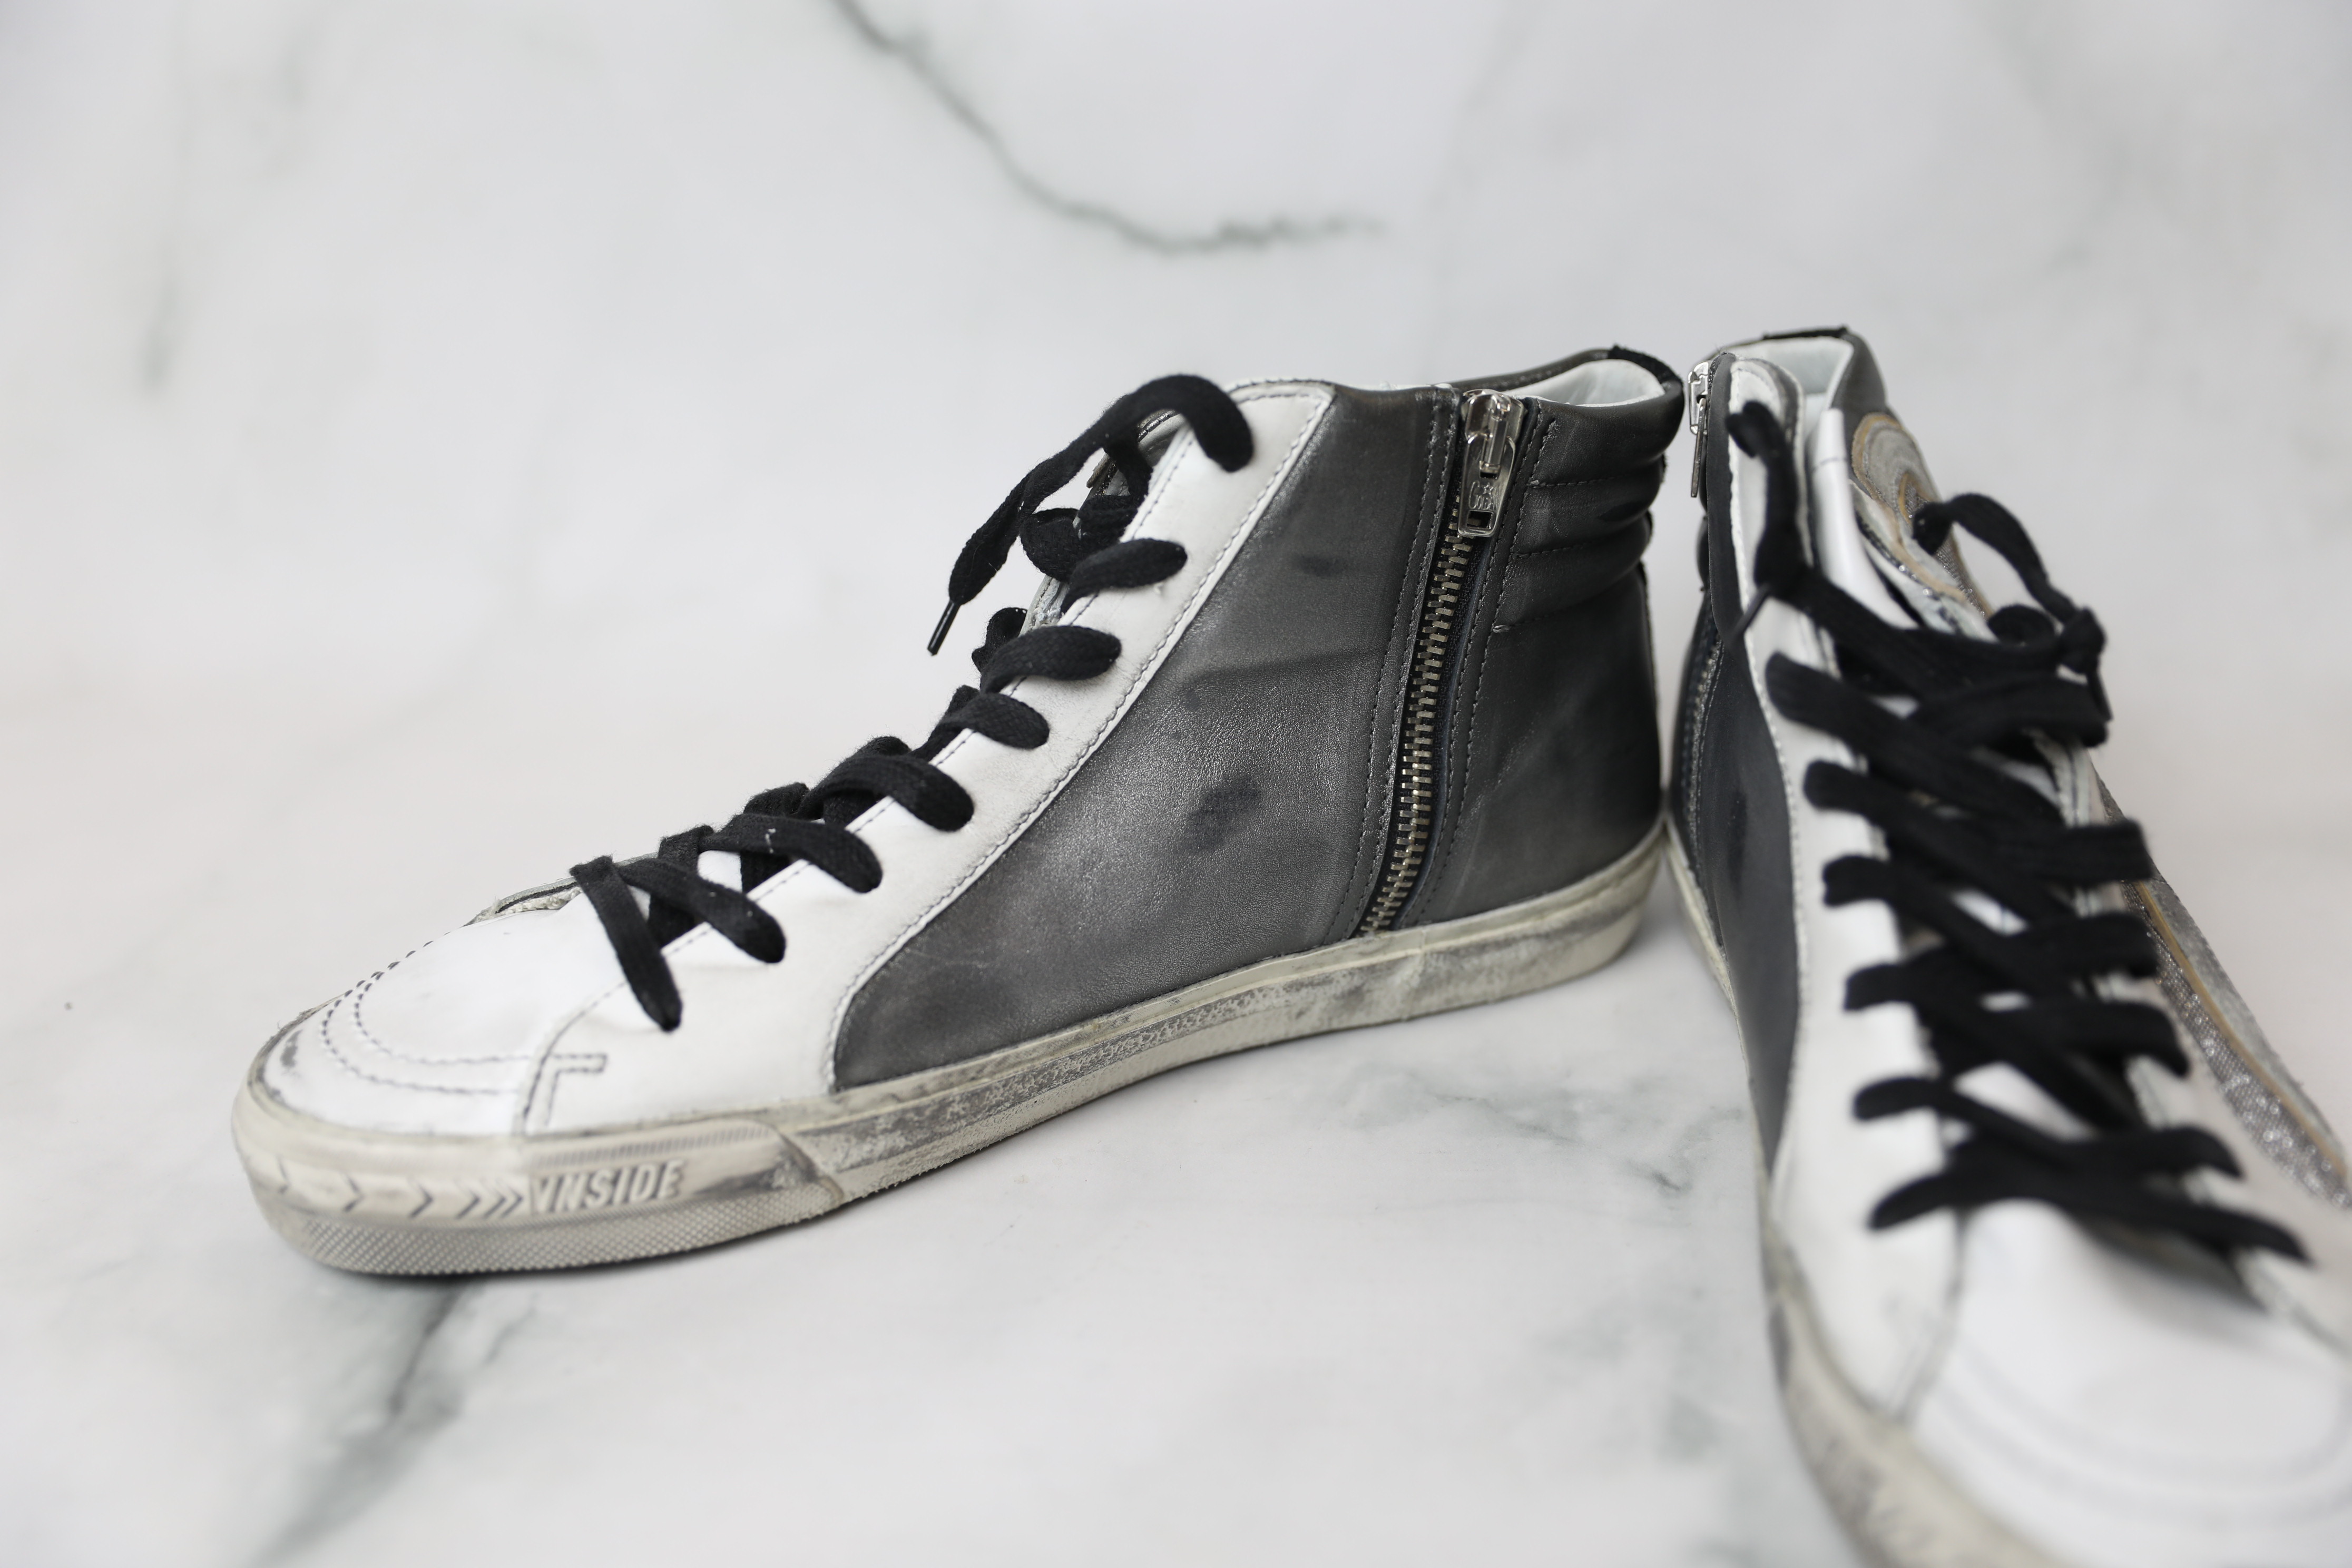 Golden Goose Shoes Grey Slide Gunmetal/Shimmer/White Star Black Lace-up  High Top Sneakers, New in Box WA001